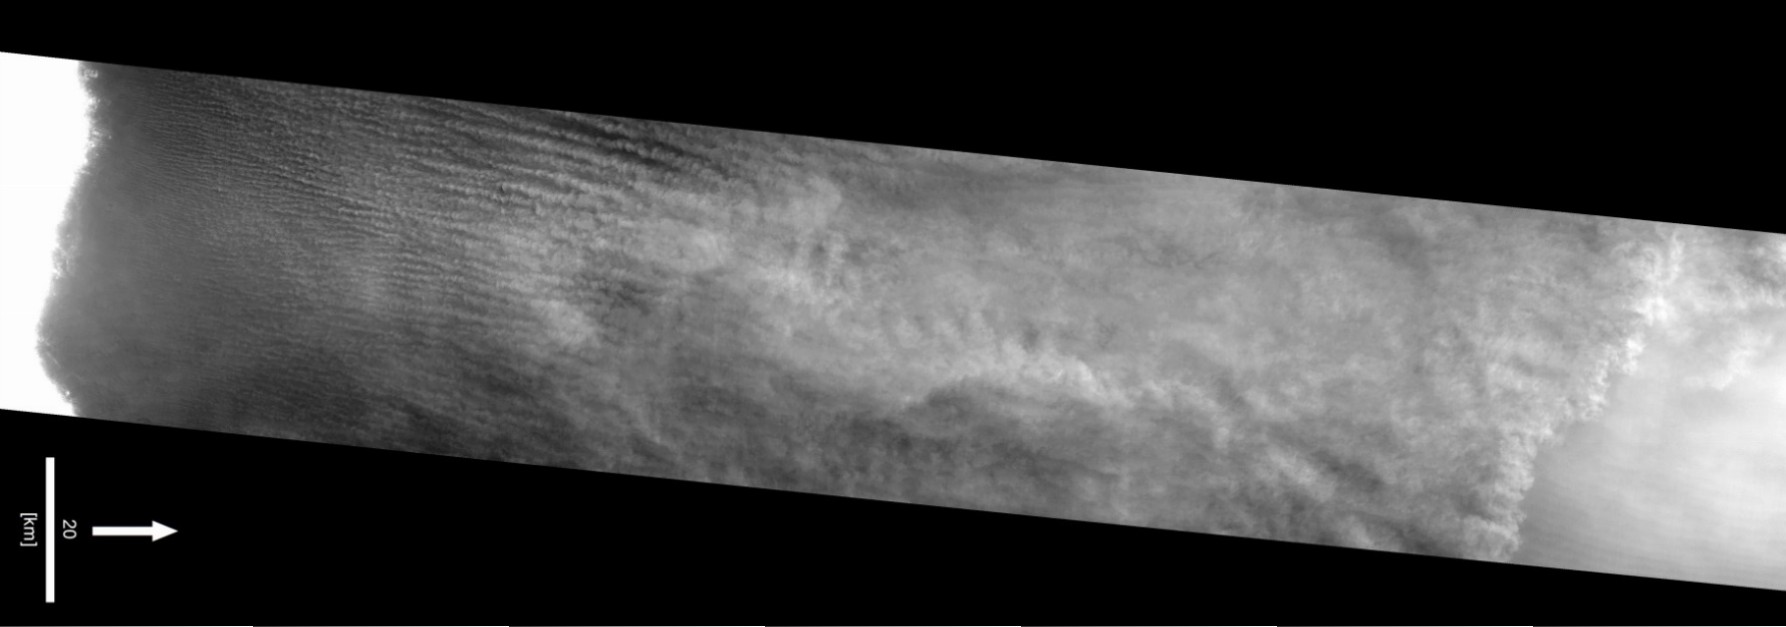 Image 1: Dust storm event in eastern Hellas Planitia. The white area at the left of the image is the east-west trending wrinkle ridge. Note the helical currents in its southern part and the flow front in the very north (CTX image D02_027836_ 1333_XN_46S272W). Image credit: NASA, JPL, Malin Space Science 